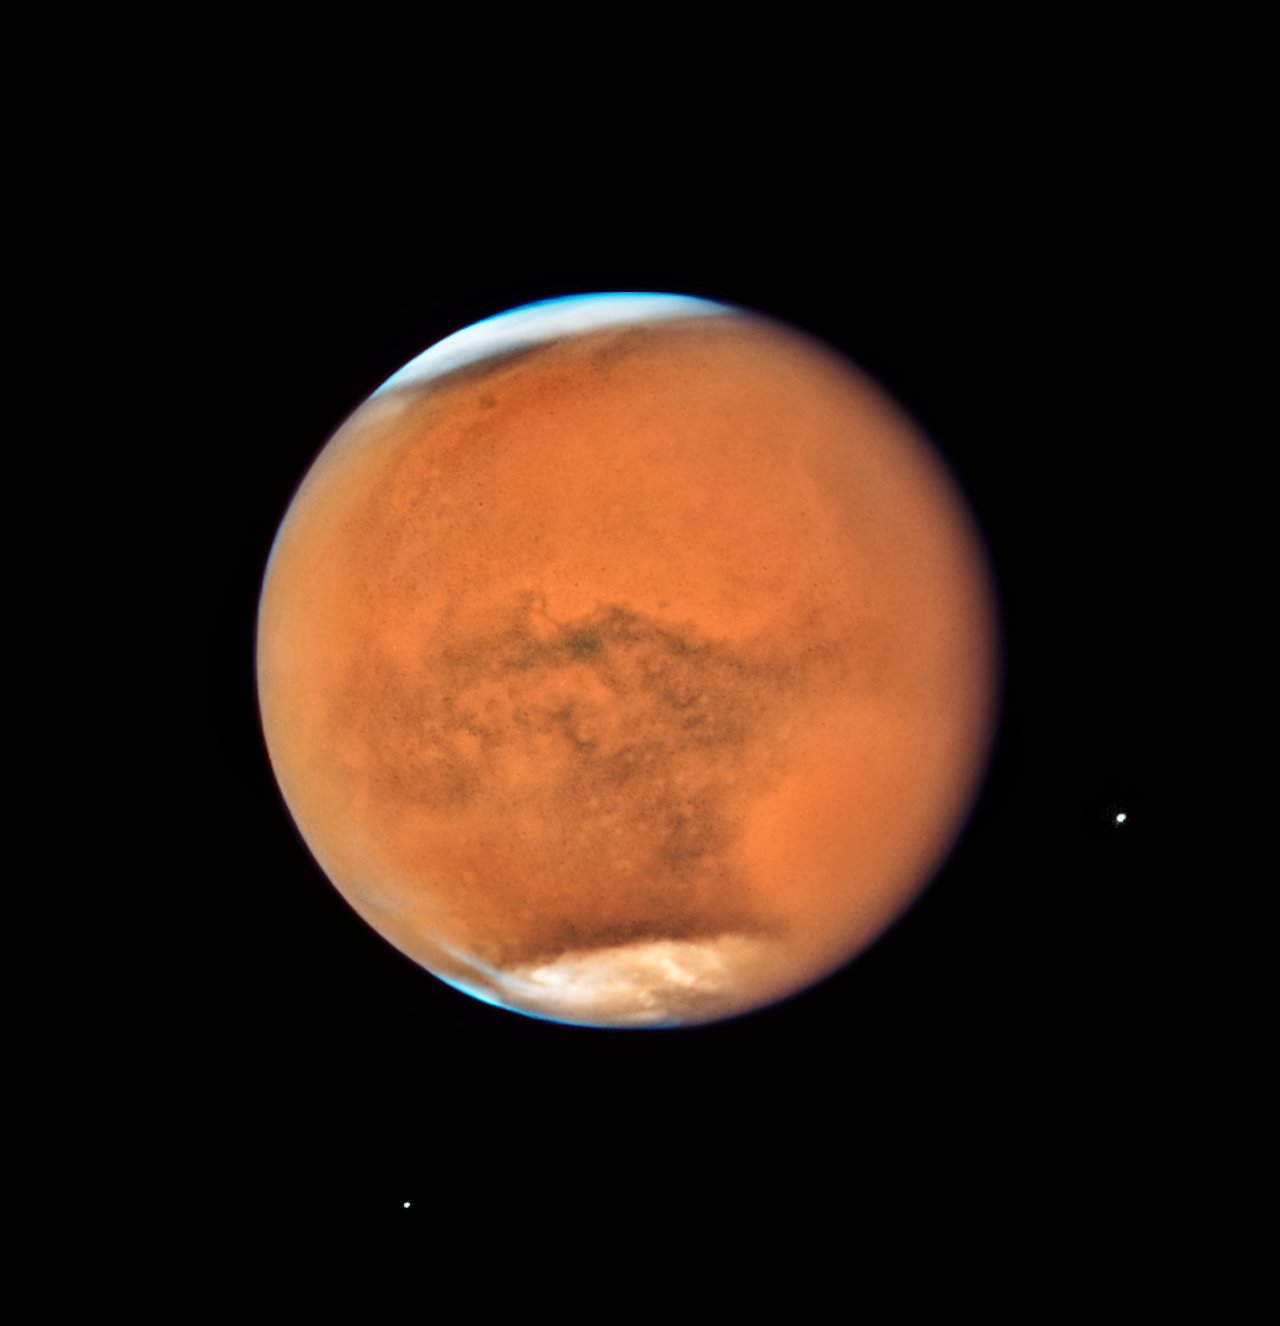 mars is the nearest to earth its been in 15 years so hubble took some photos stormy opposition 2018